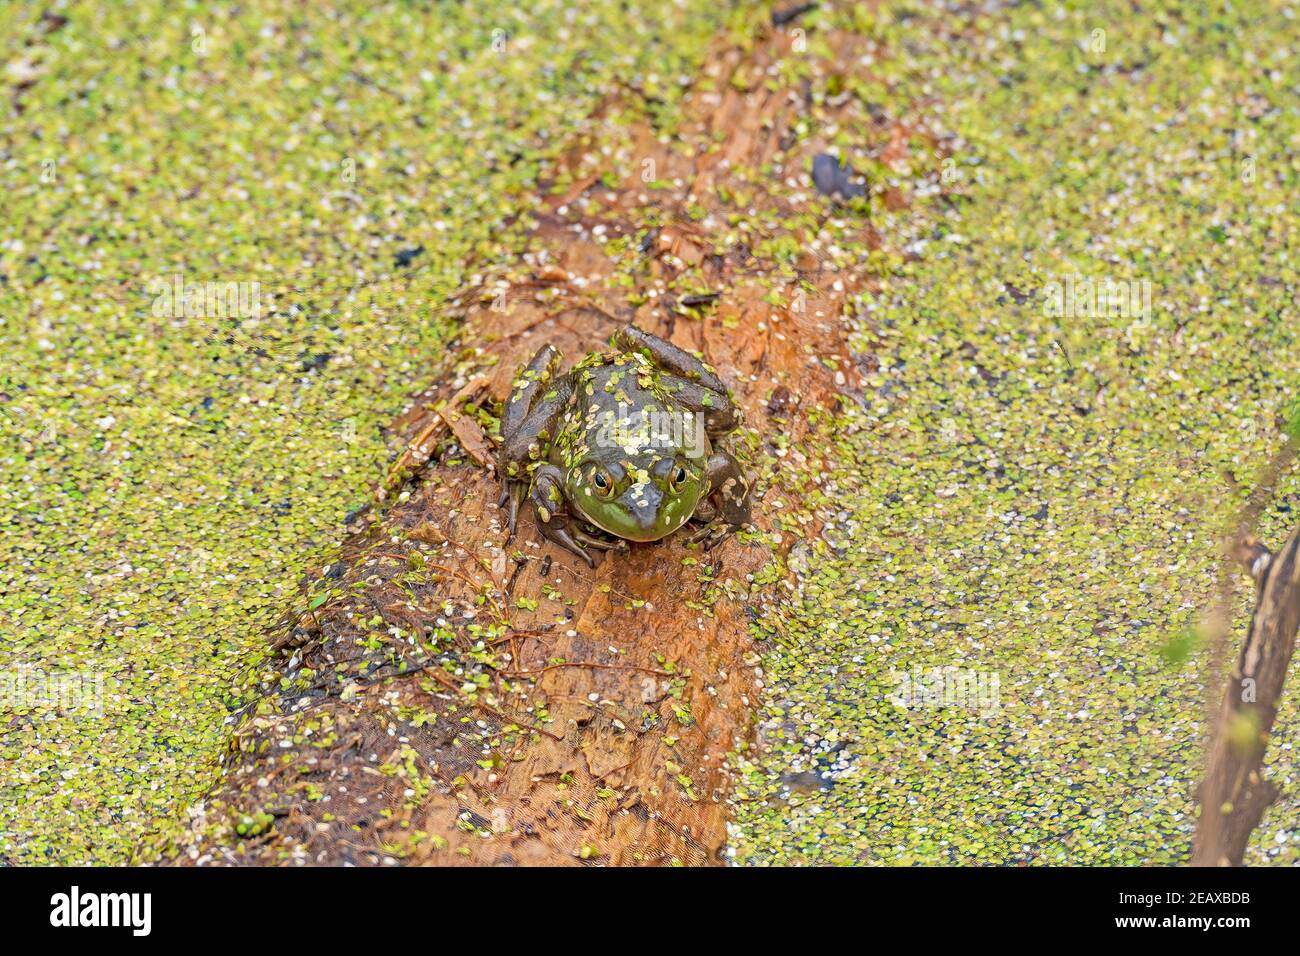 Green Frog Covered in Duckweed in Midewin National Tallgrass Prairie in Wilmington, Illinois Stock Photo